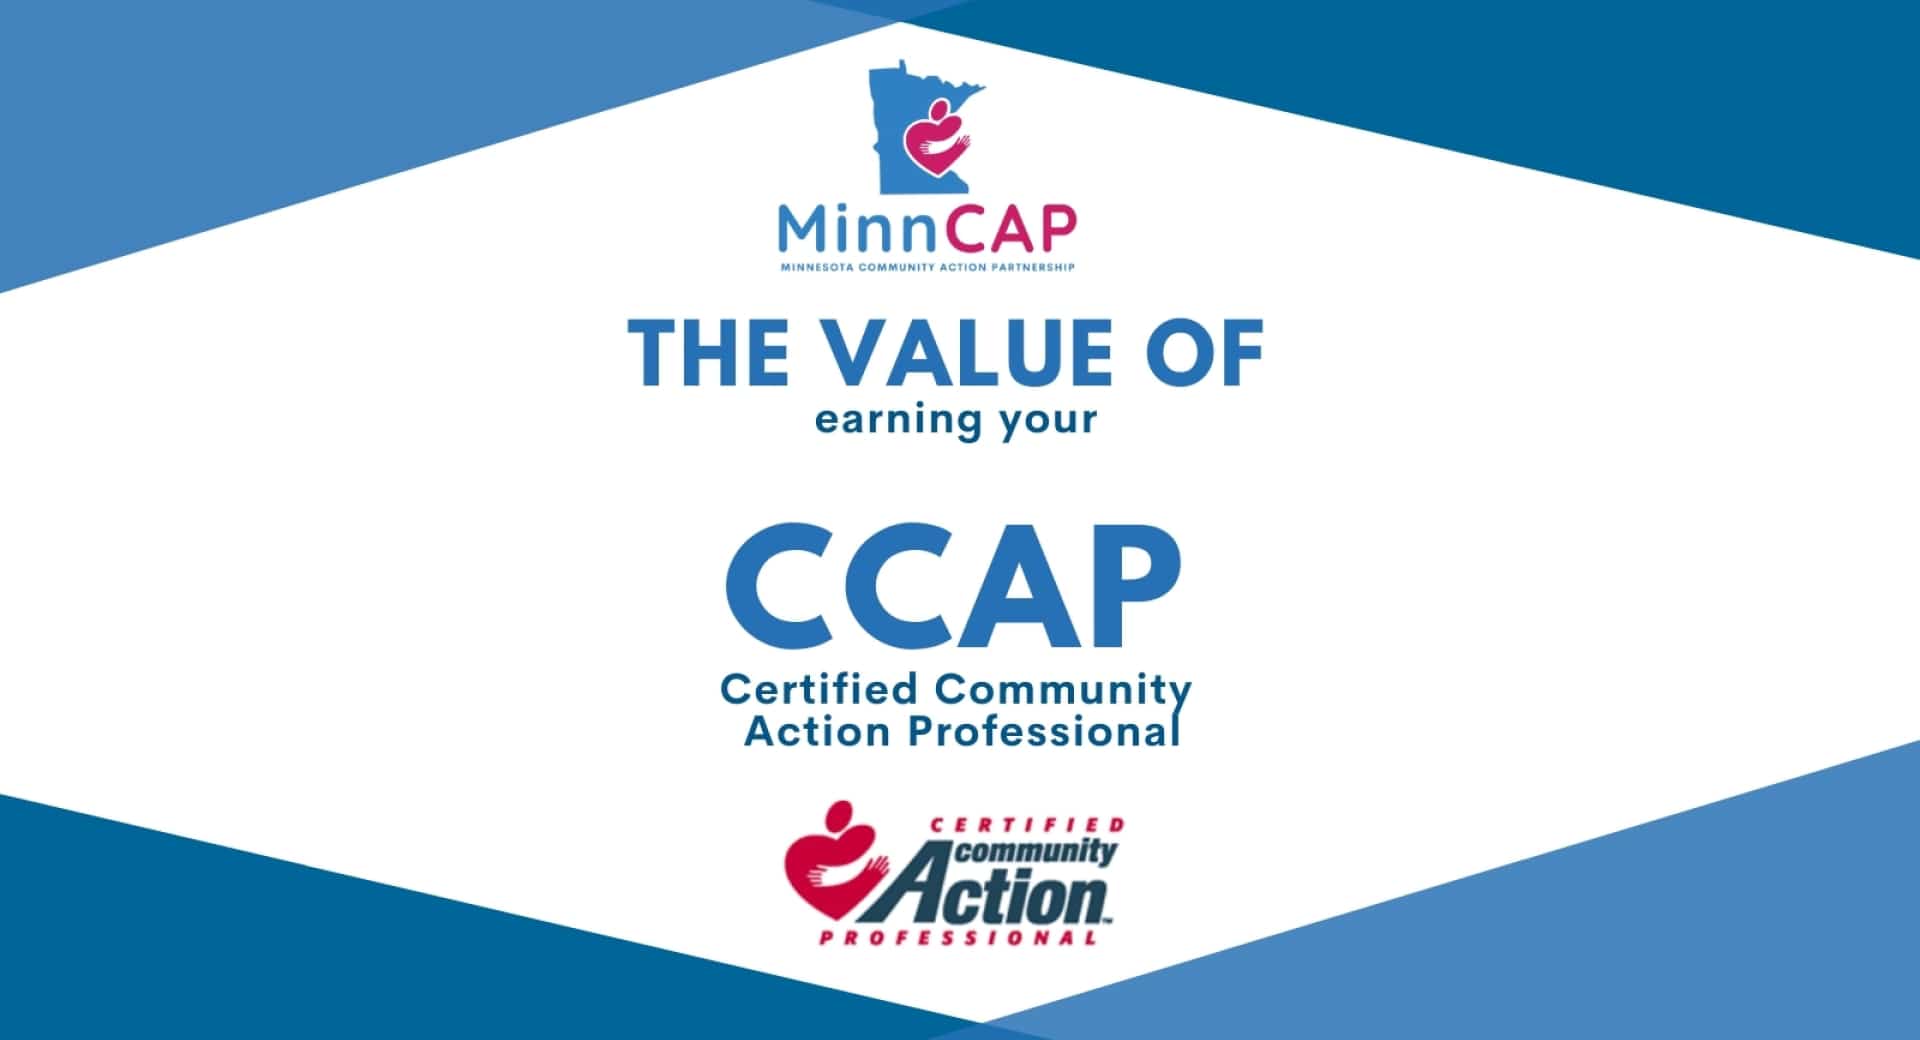 Earning a CCAP brings value to both the individual and the agency's leadership